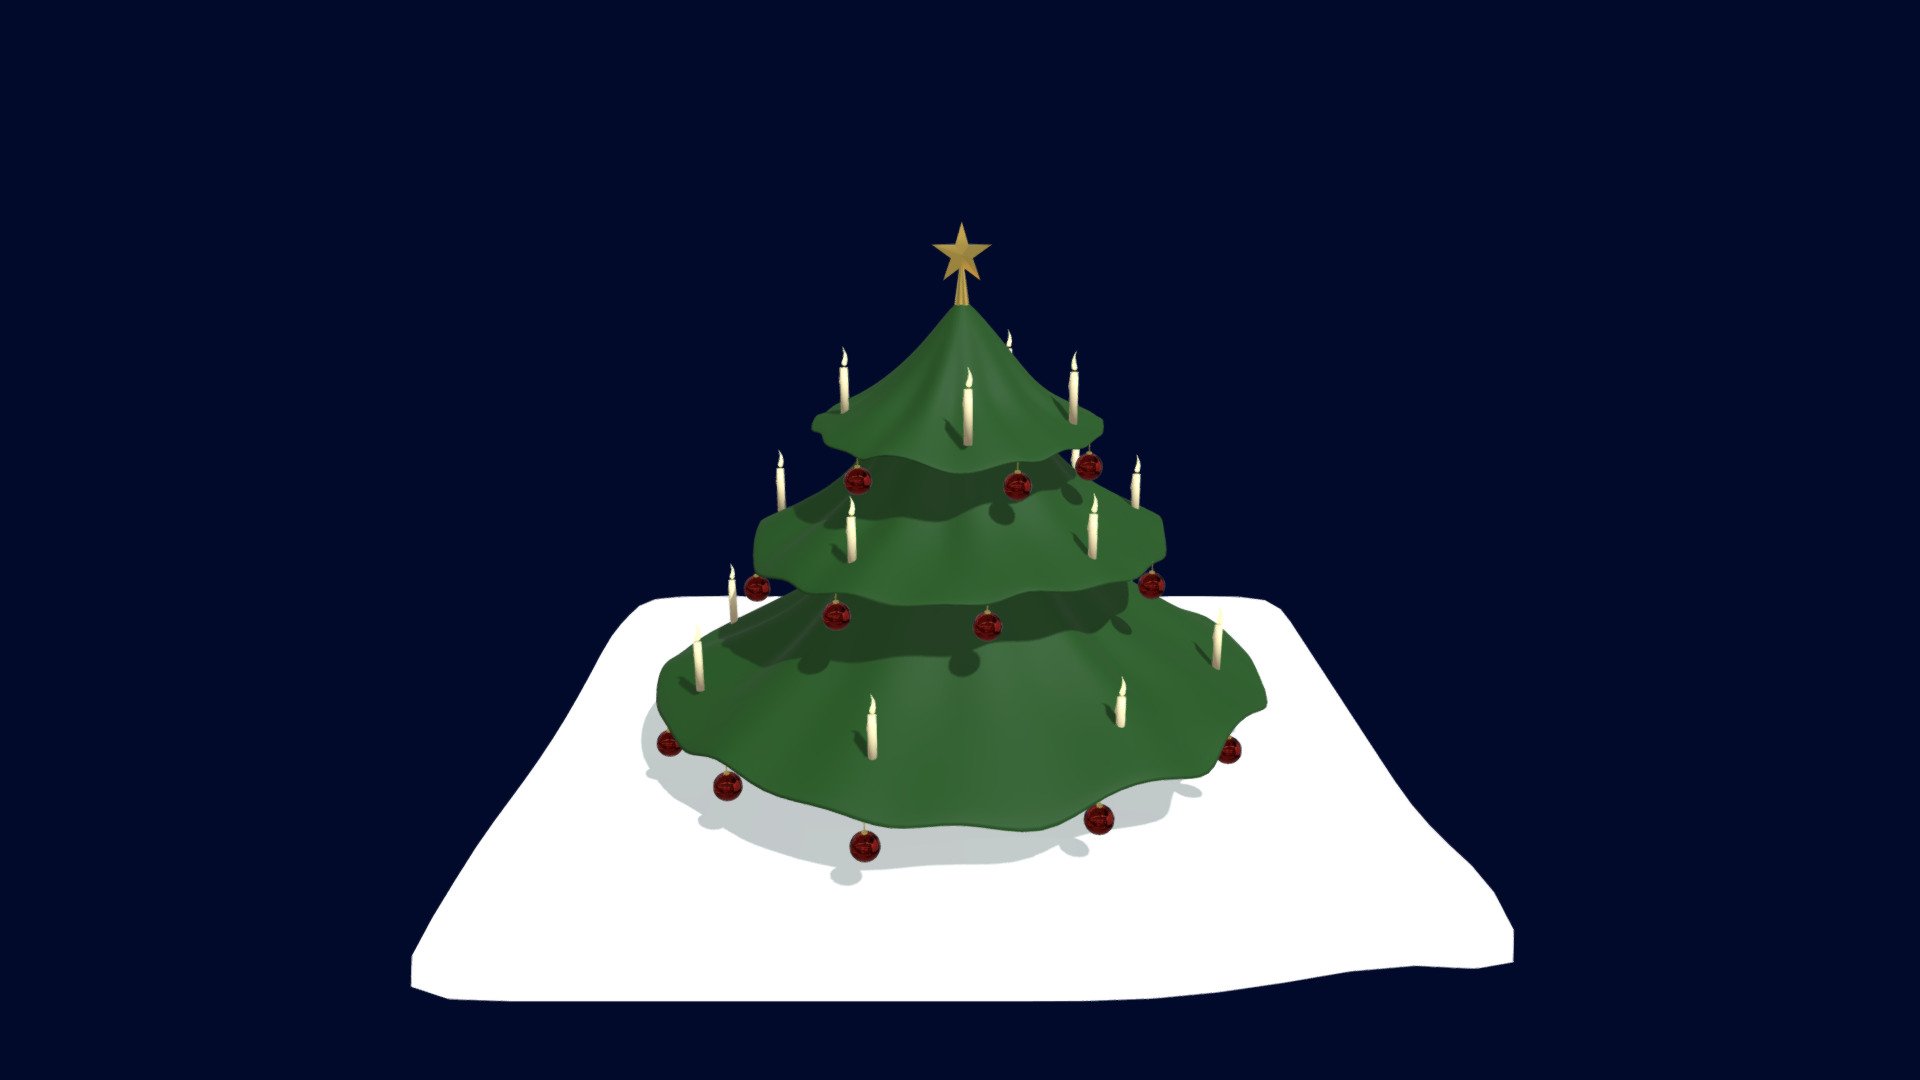 Stylized christmas tree with candles and balls